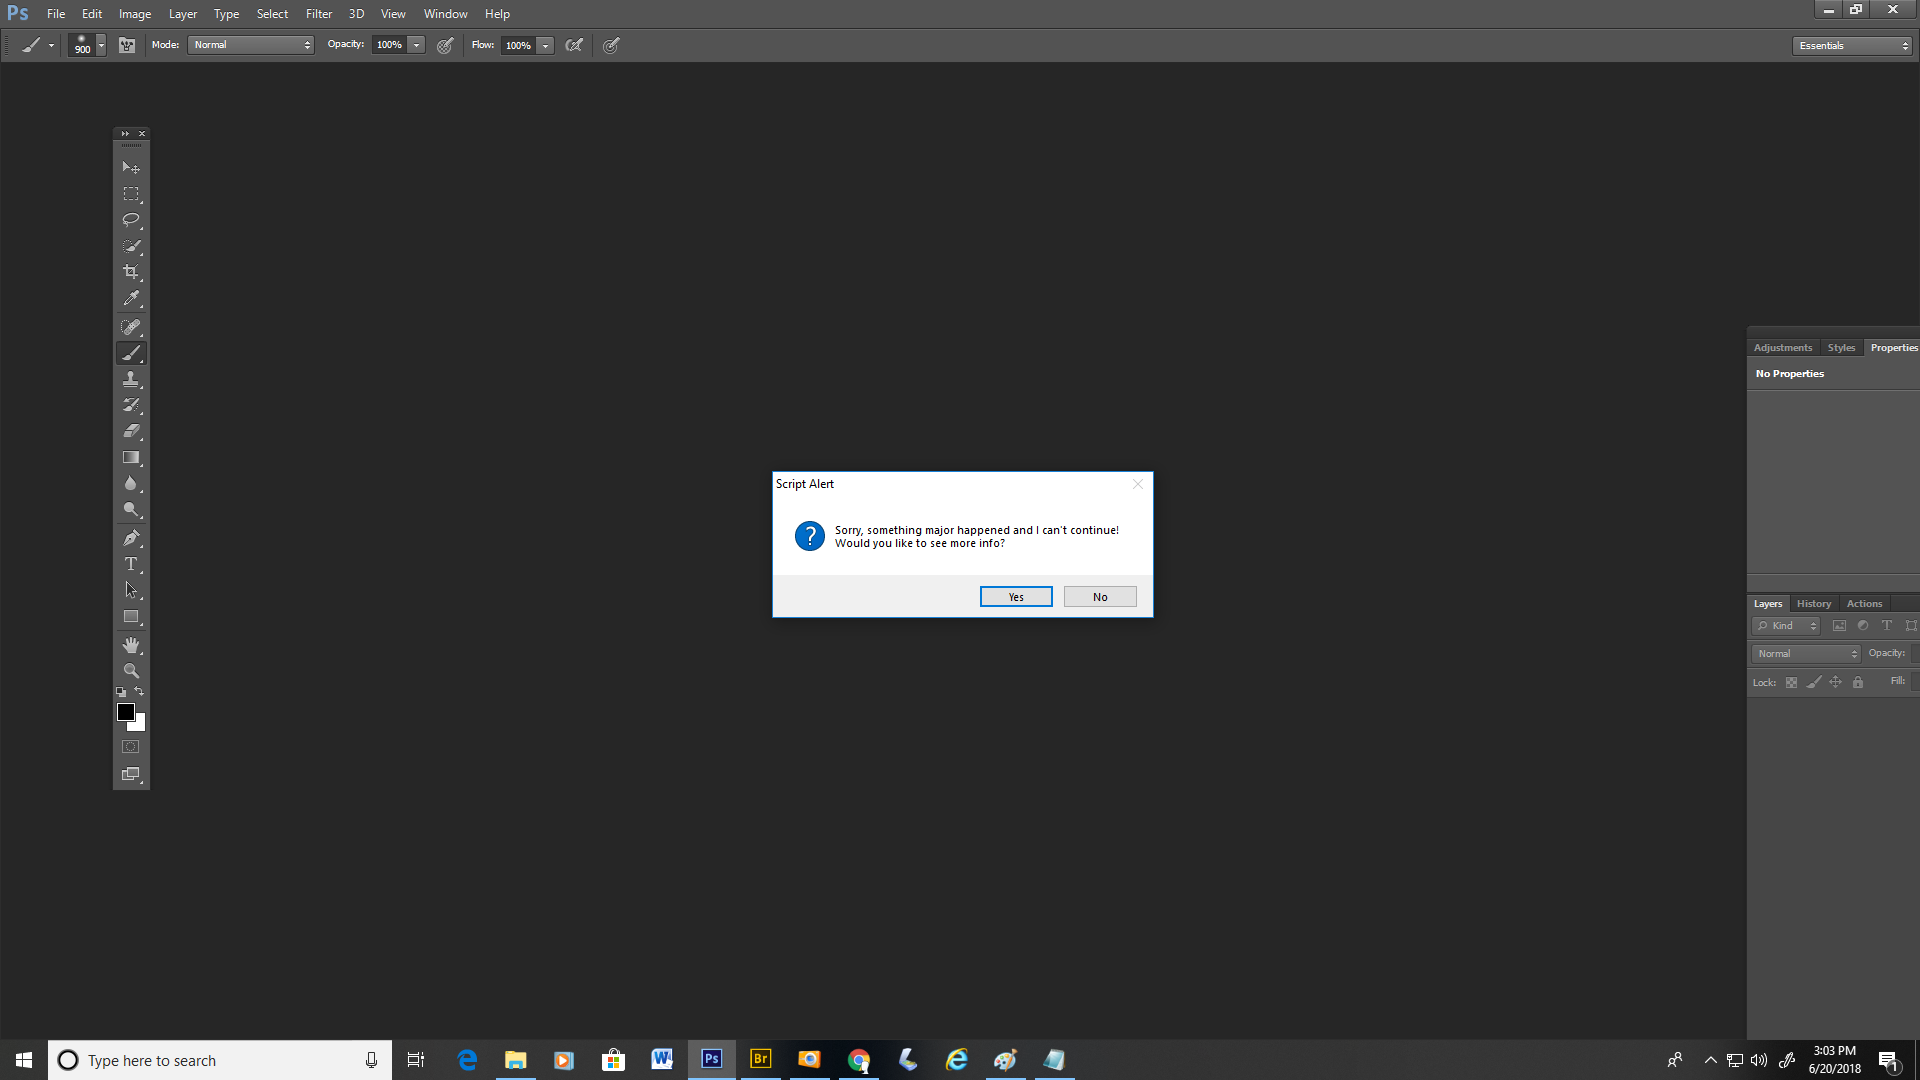 photoshop cs5 portable windows does not have a constructor